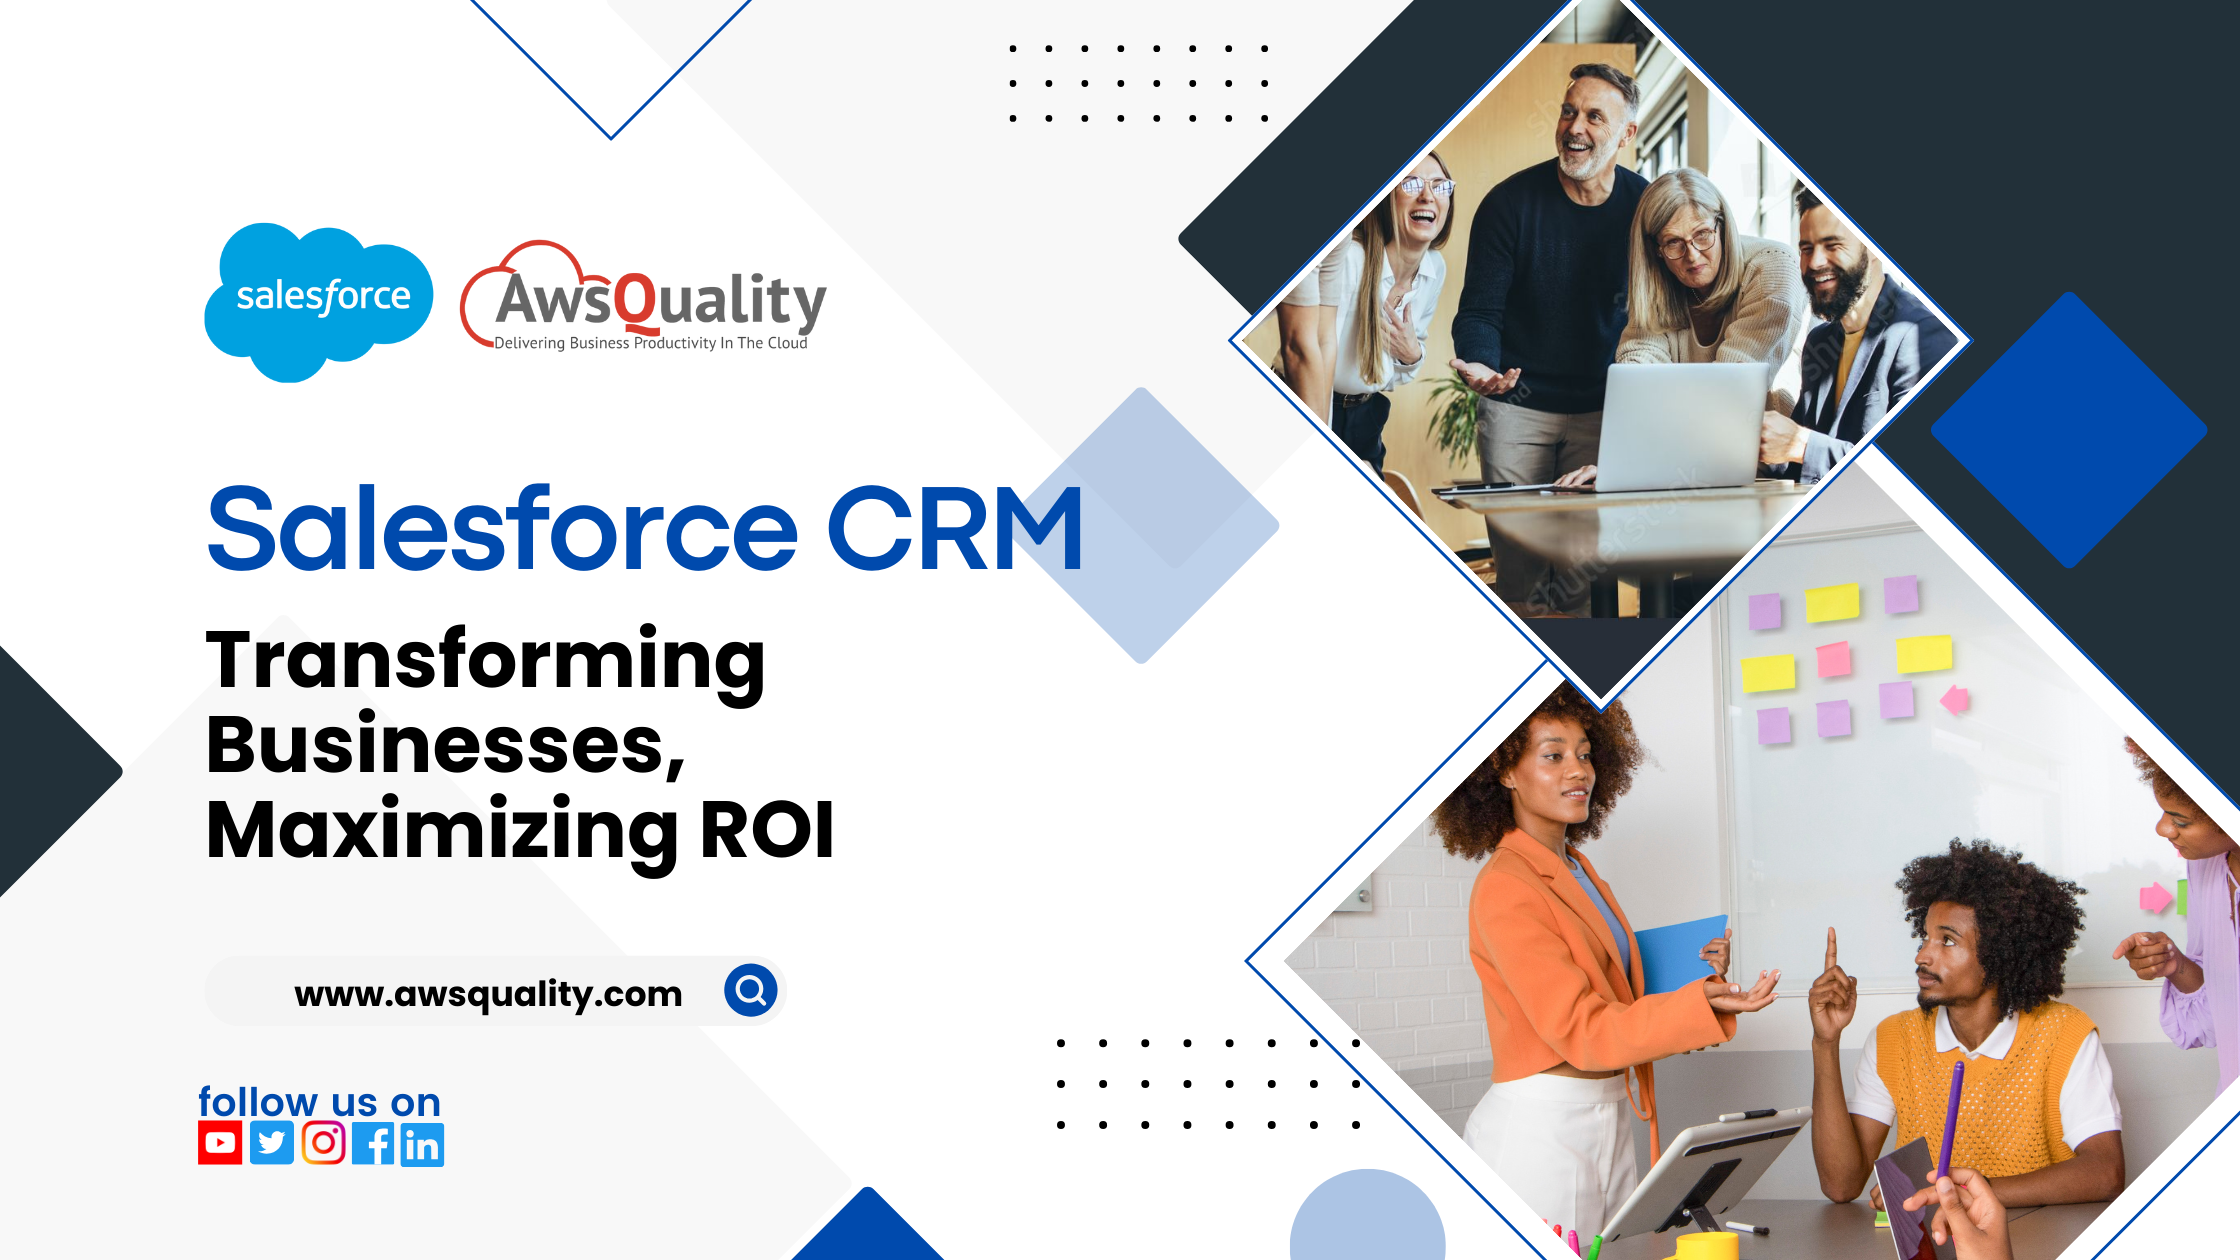 Maximize ROI with Salesforce CRM